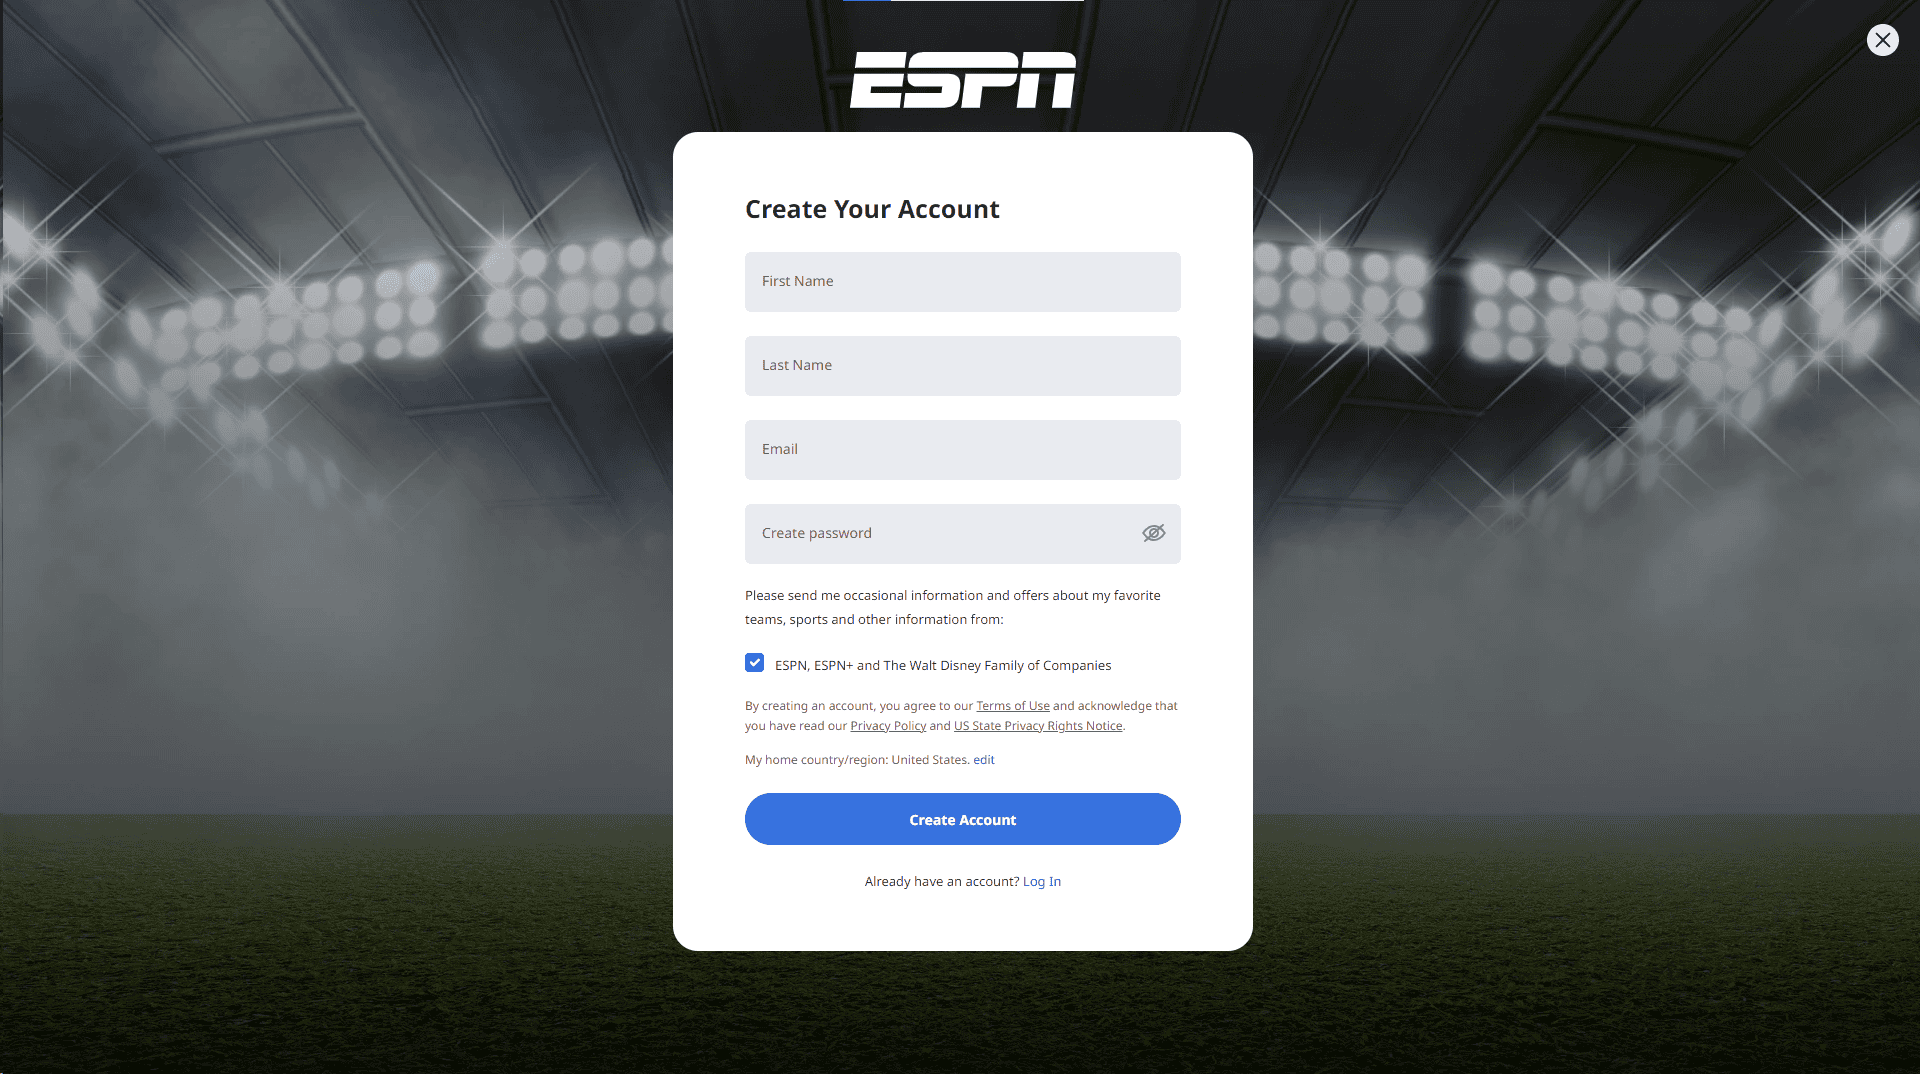 How to Sign-Up at ESPN BET